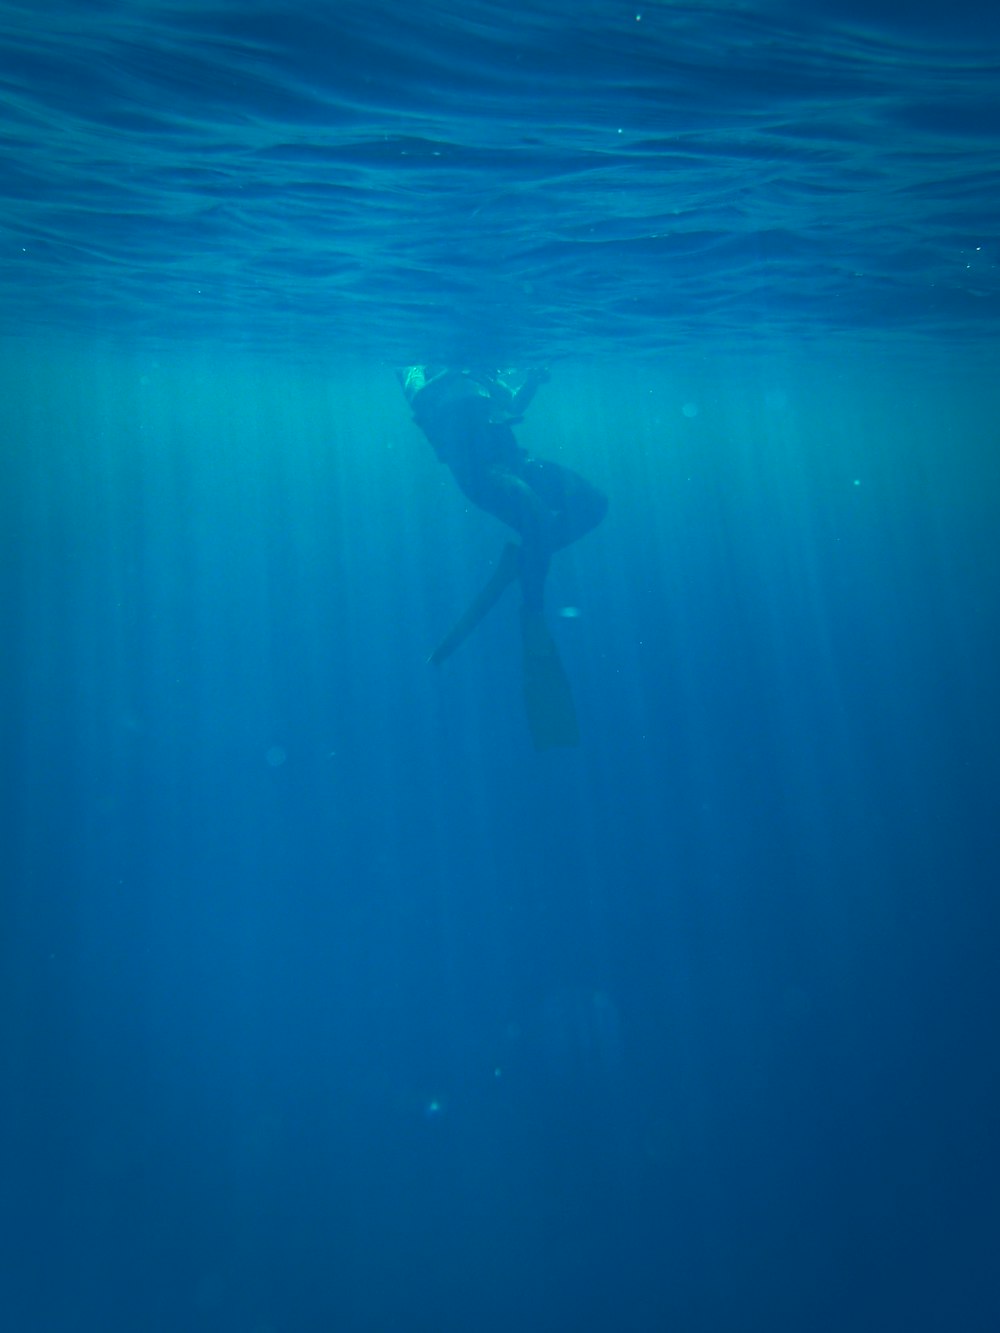 a person is swimming in the ocean with a surfboard